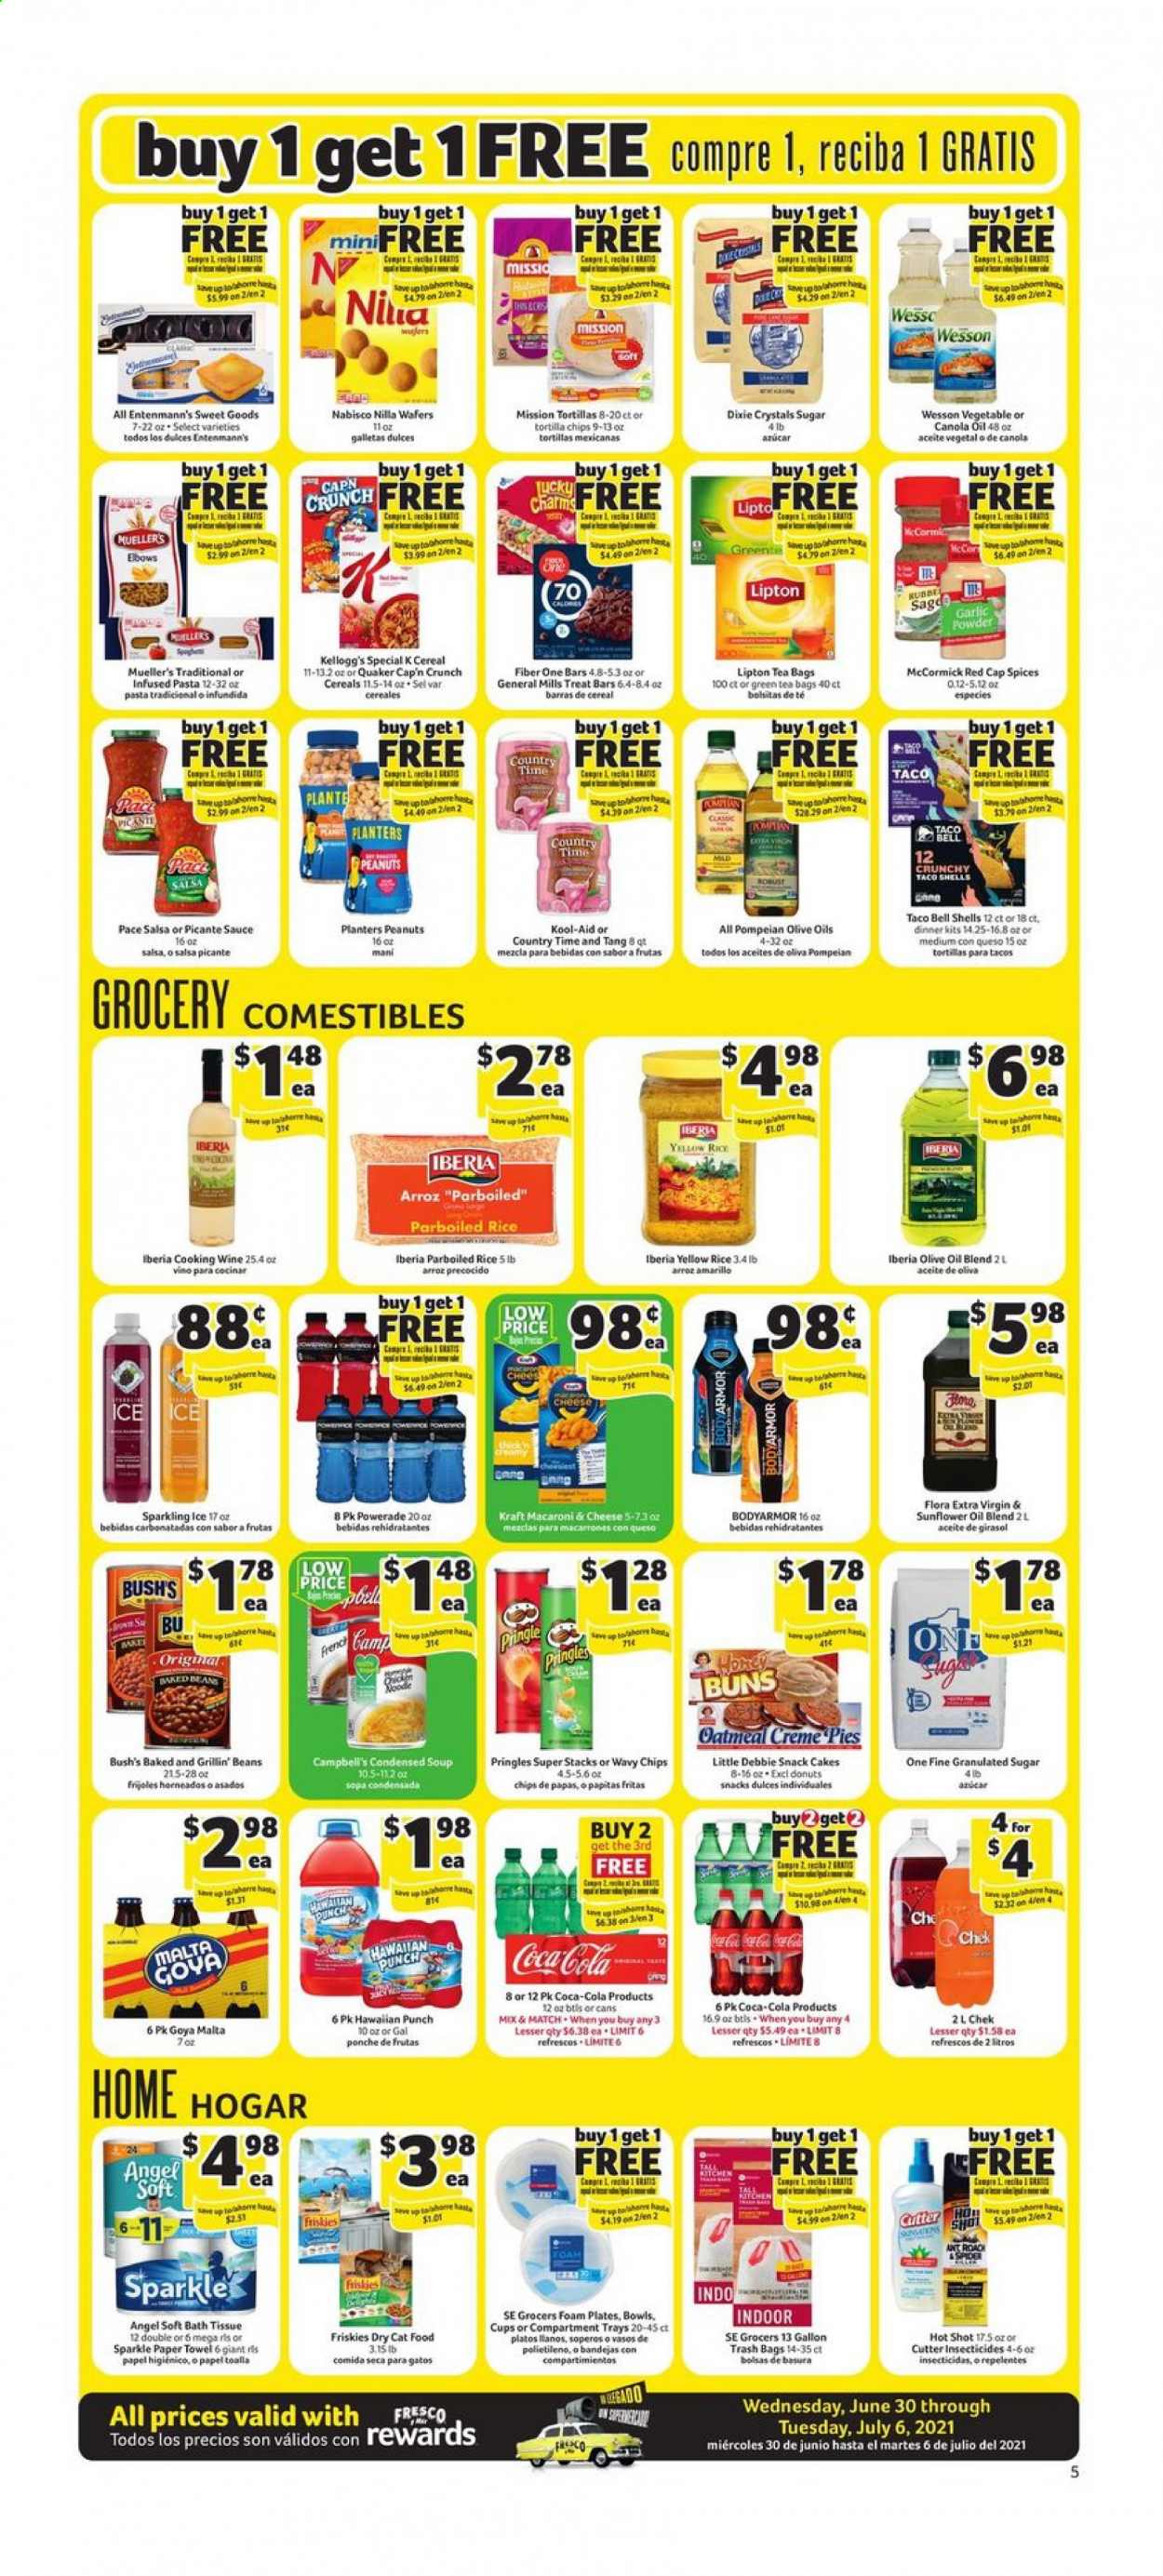 thumbnail - Fresco y Más Flyer - 06/30/2021 - 07/06/2021 - Sales products - buns, donut, Entenmann's, beans, Campbell's, macaroni & cheese, condensed soup, soup, pasta, sauce, dinner kit, Quaker, instant soup, Kraft®, Flora, wafers, snack, Kellogg's, tortilla chips, Pringles, chips, granulated sugar, sugar, oatmeal, Goya, cereals, Cap'n Crunch, Fiber One, rice, parboiled rice, garlic powder, salsa, canola oil, extra virgin olive oil, sunflower oil, olive oil, oil, peanuts, Planters, Coca-Cola, Powerade, Lipton, Country Time, green tea, tea bags, cooking wine. Page 5.